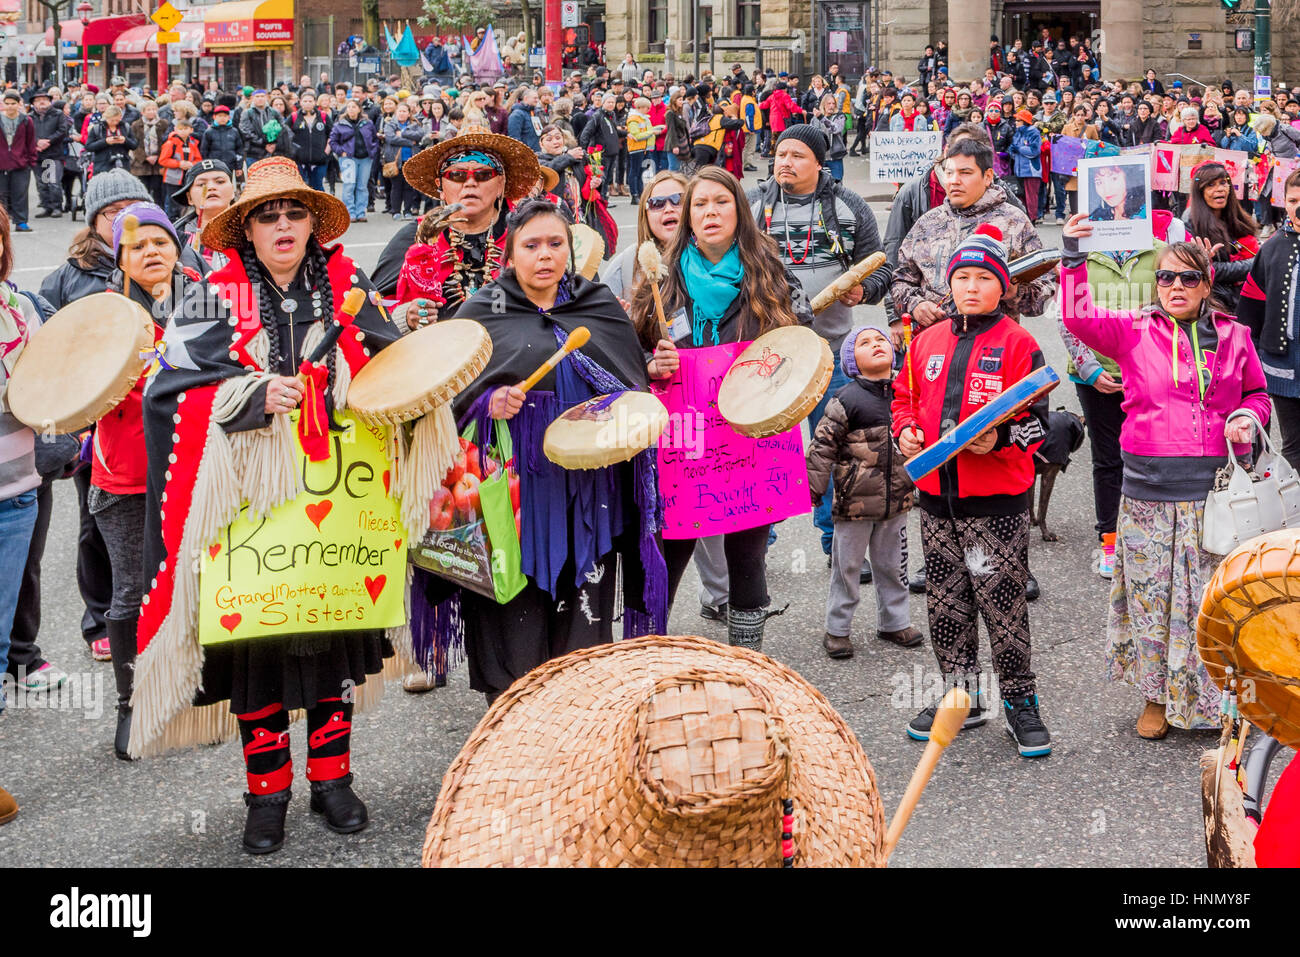 Downtown Eastside Women's Memorial march, Vancouver, British Columbia, Canada. Credit: Michael Wheatley/Alamy Live News Stock Photo